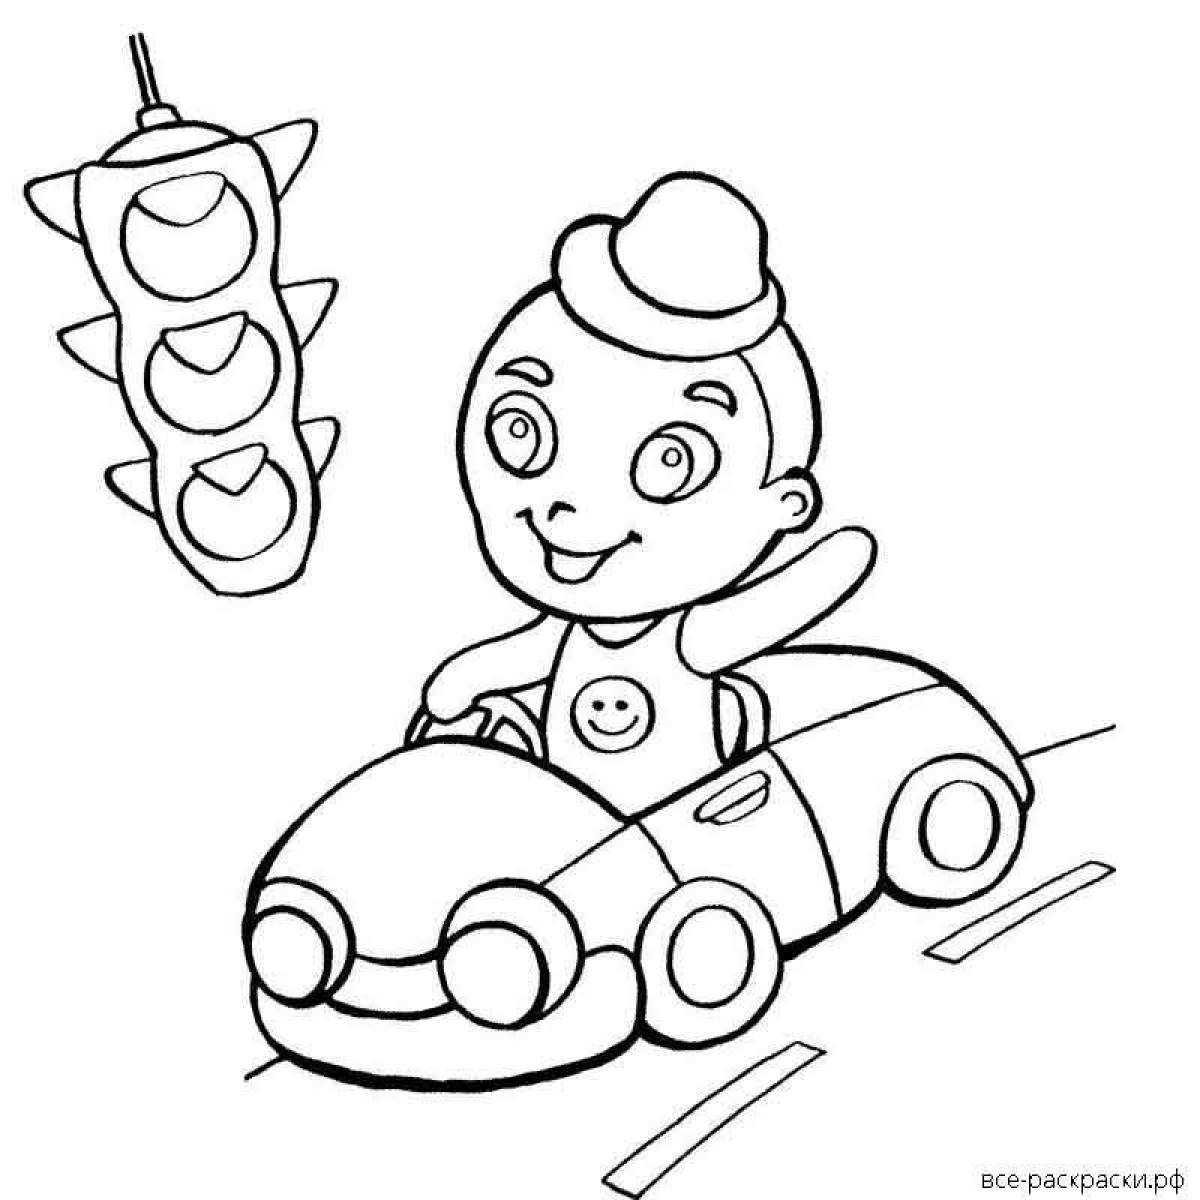 Coloring page joyful traffic light for children 6-7 years old